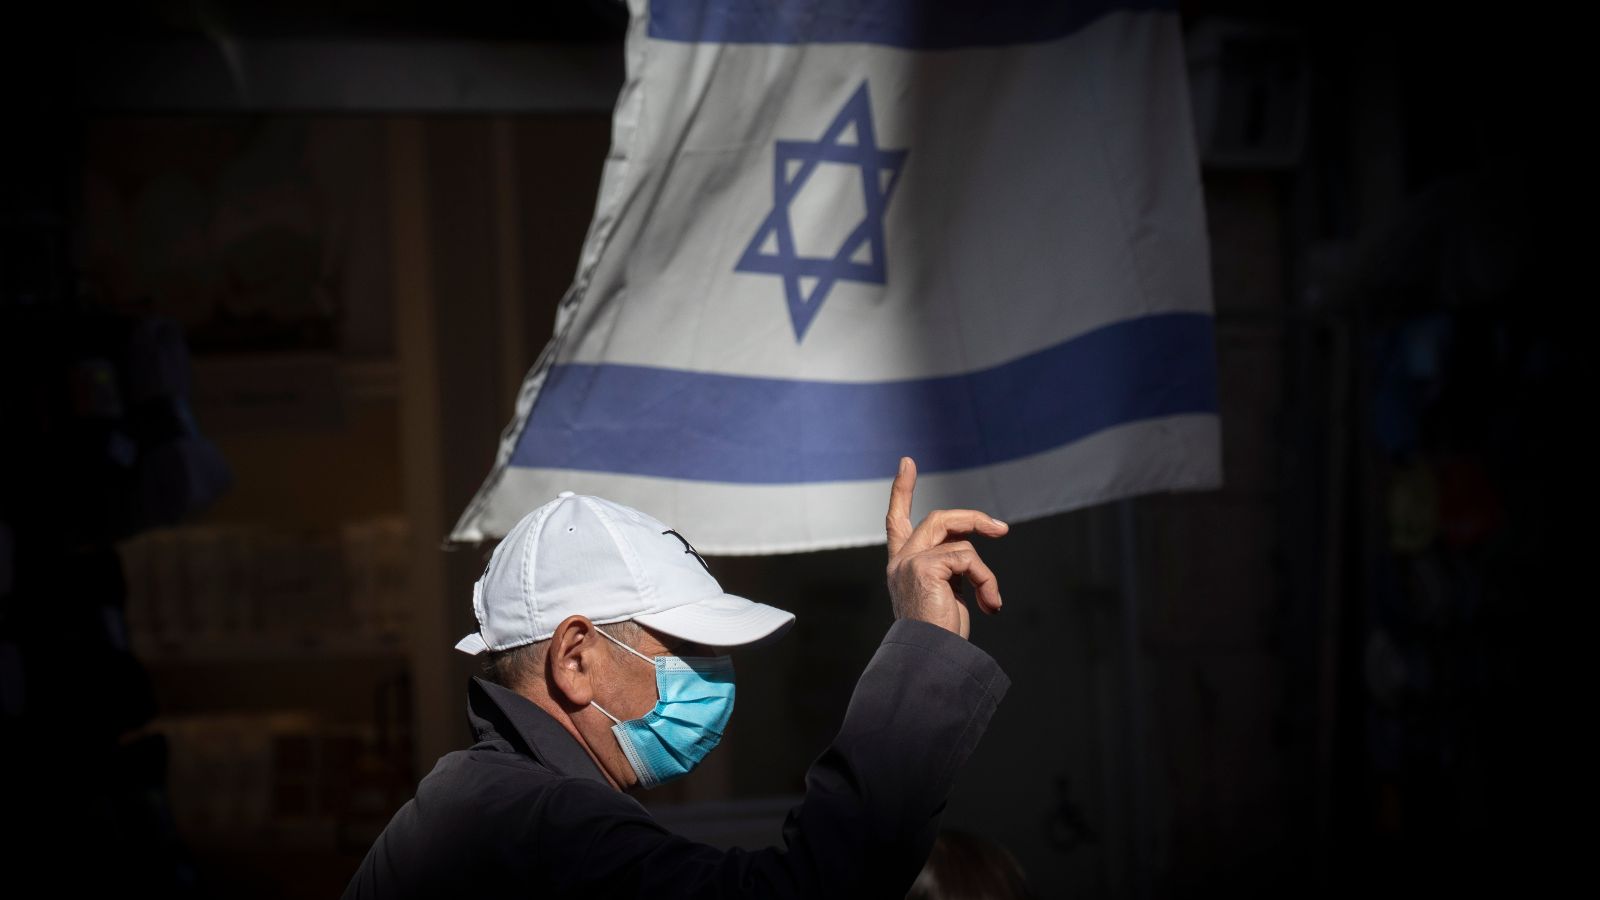 A man wears a facemask in downtown Jerusalem in December 2020. Photo by Olivier Fitoussi/Flash90